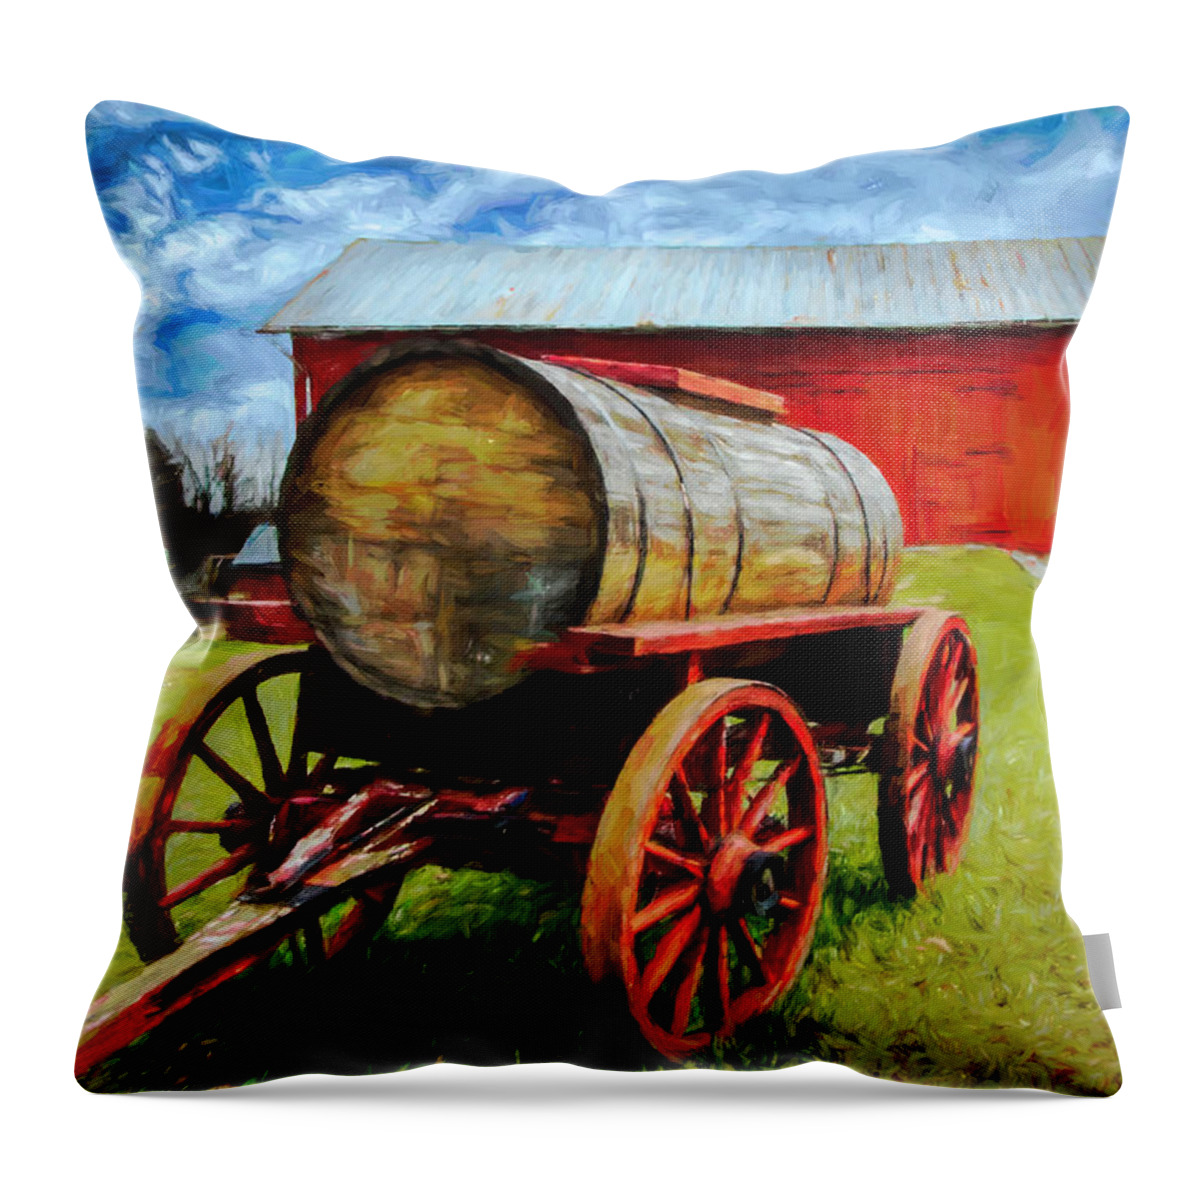  Throw Pillow featuring the photograph Water Wagon Impression by Jack Wilson